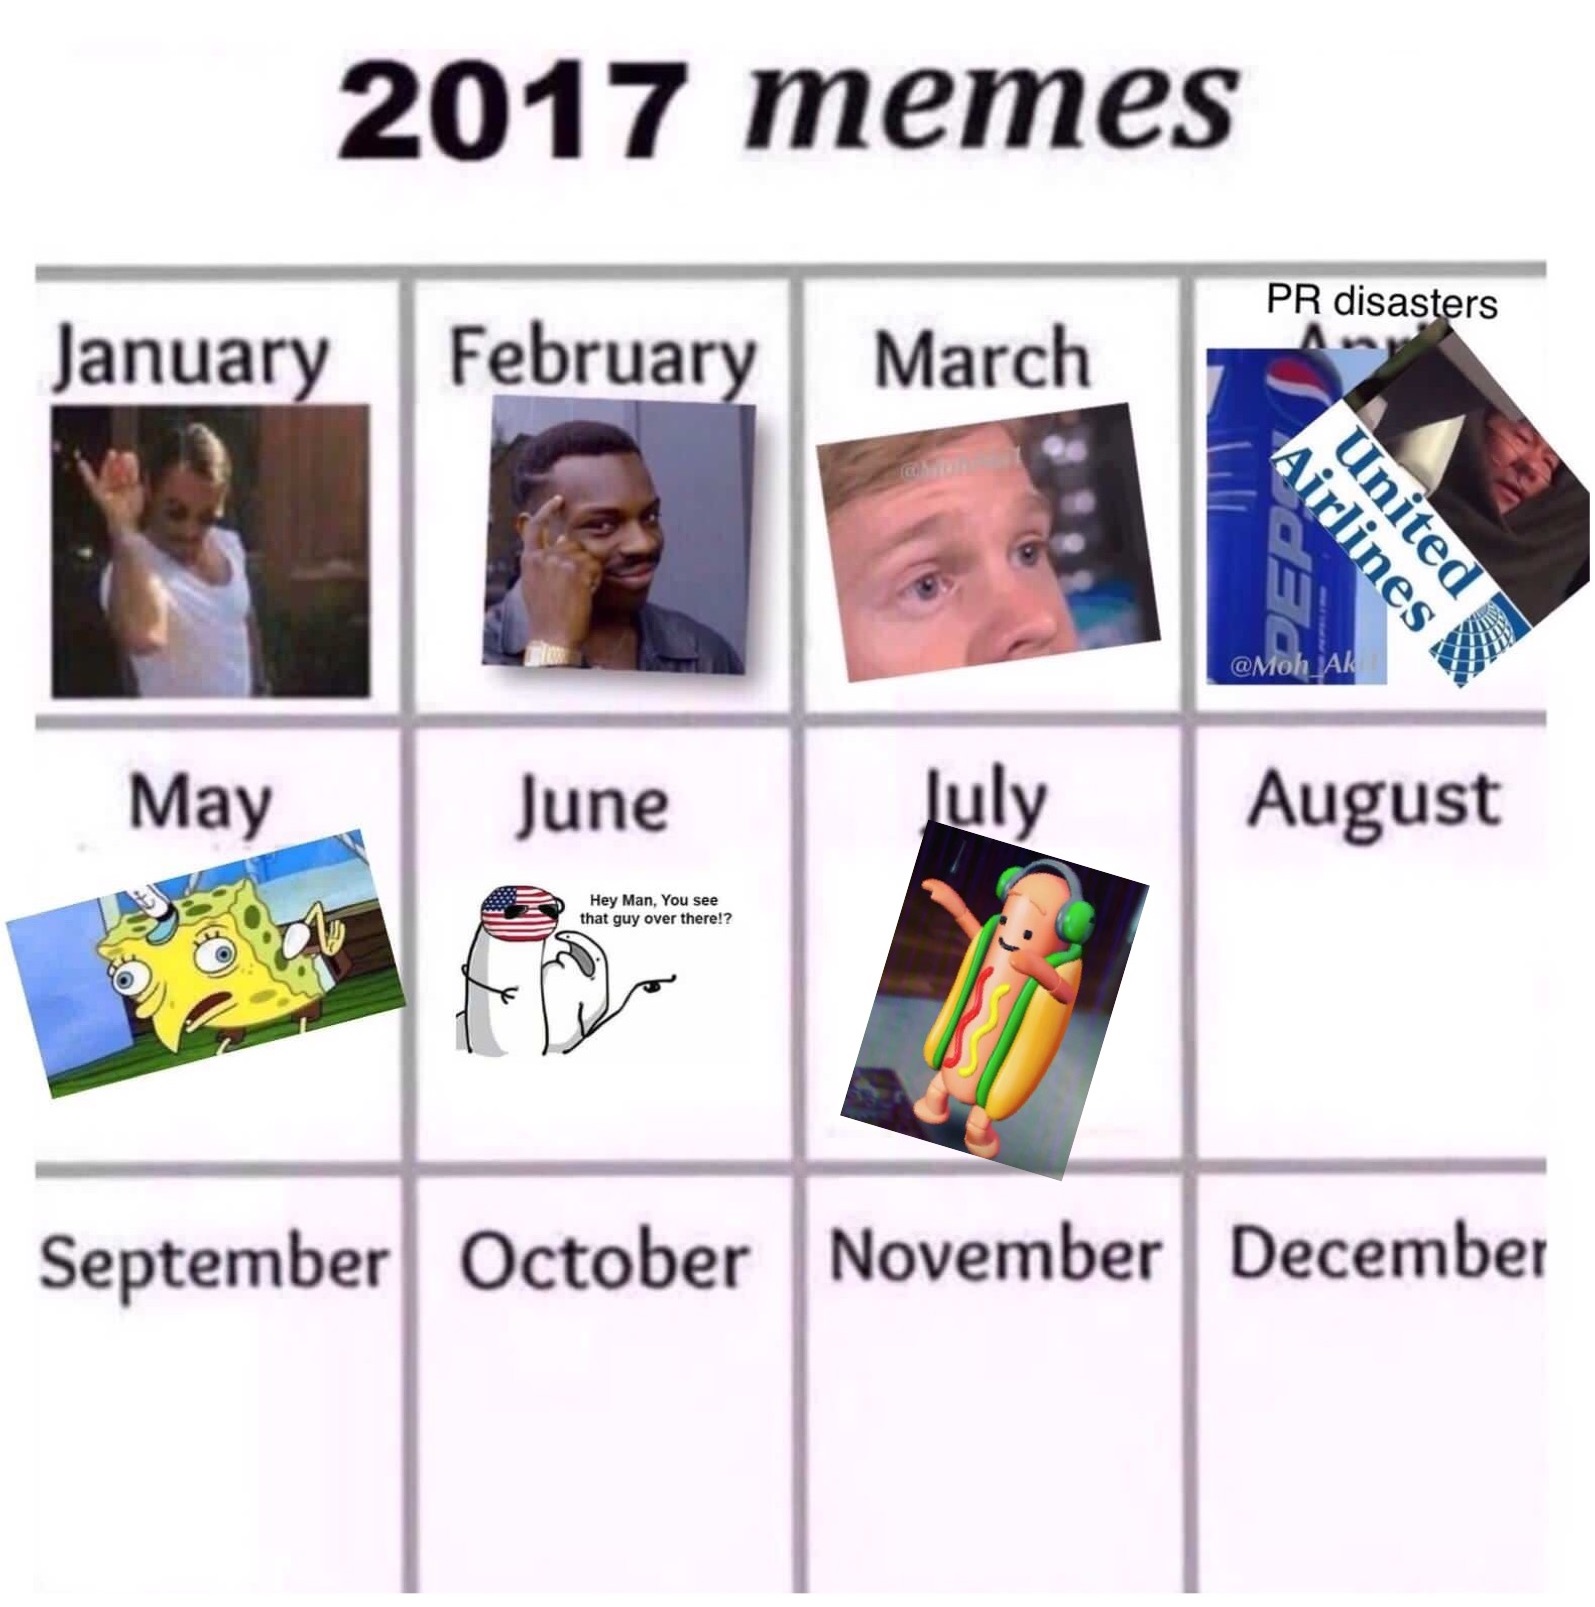 memes of every month 2017 - 2017 memes Pr disasters January February March Airlines & United 5 May June July August Hey Man, You see that guy over there!? September October November December